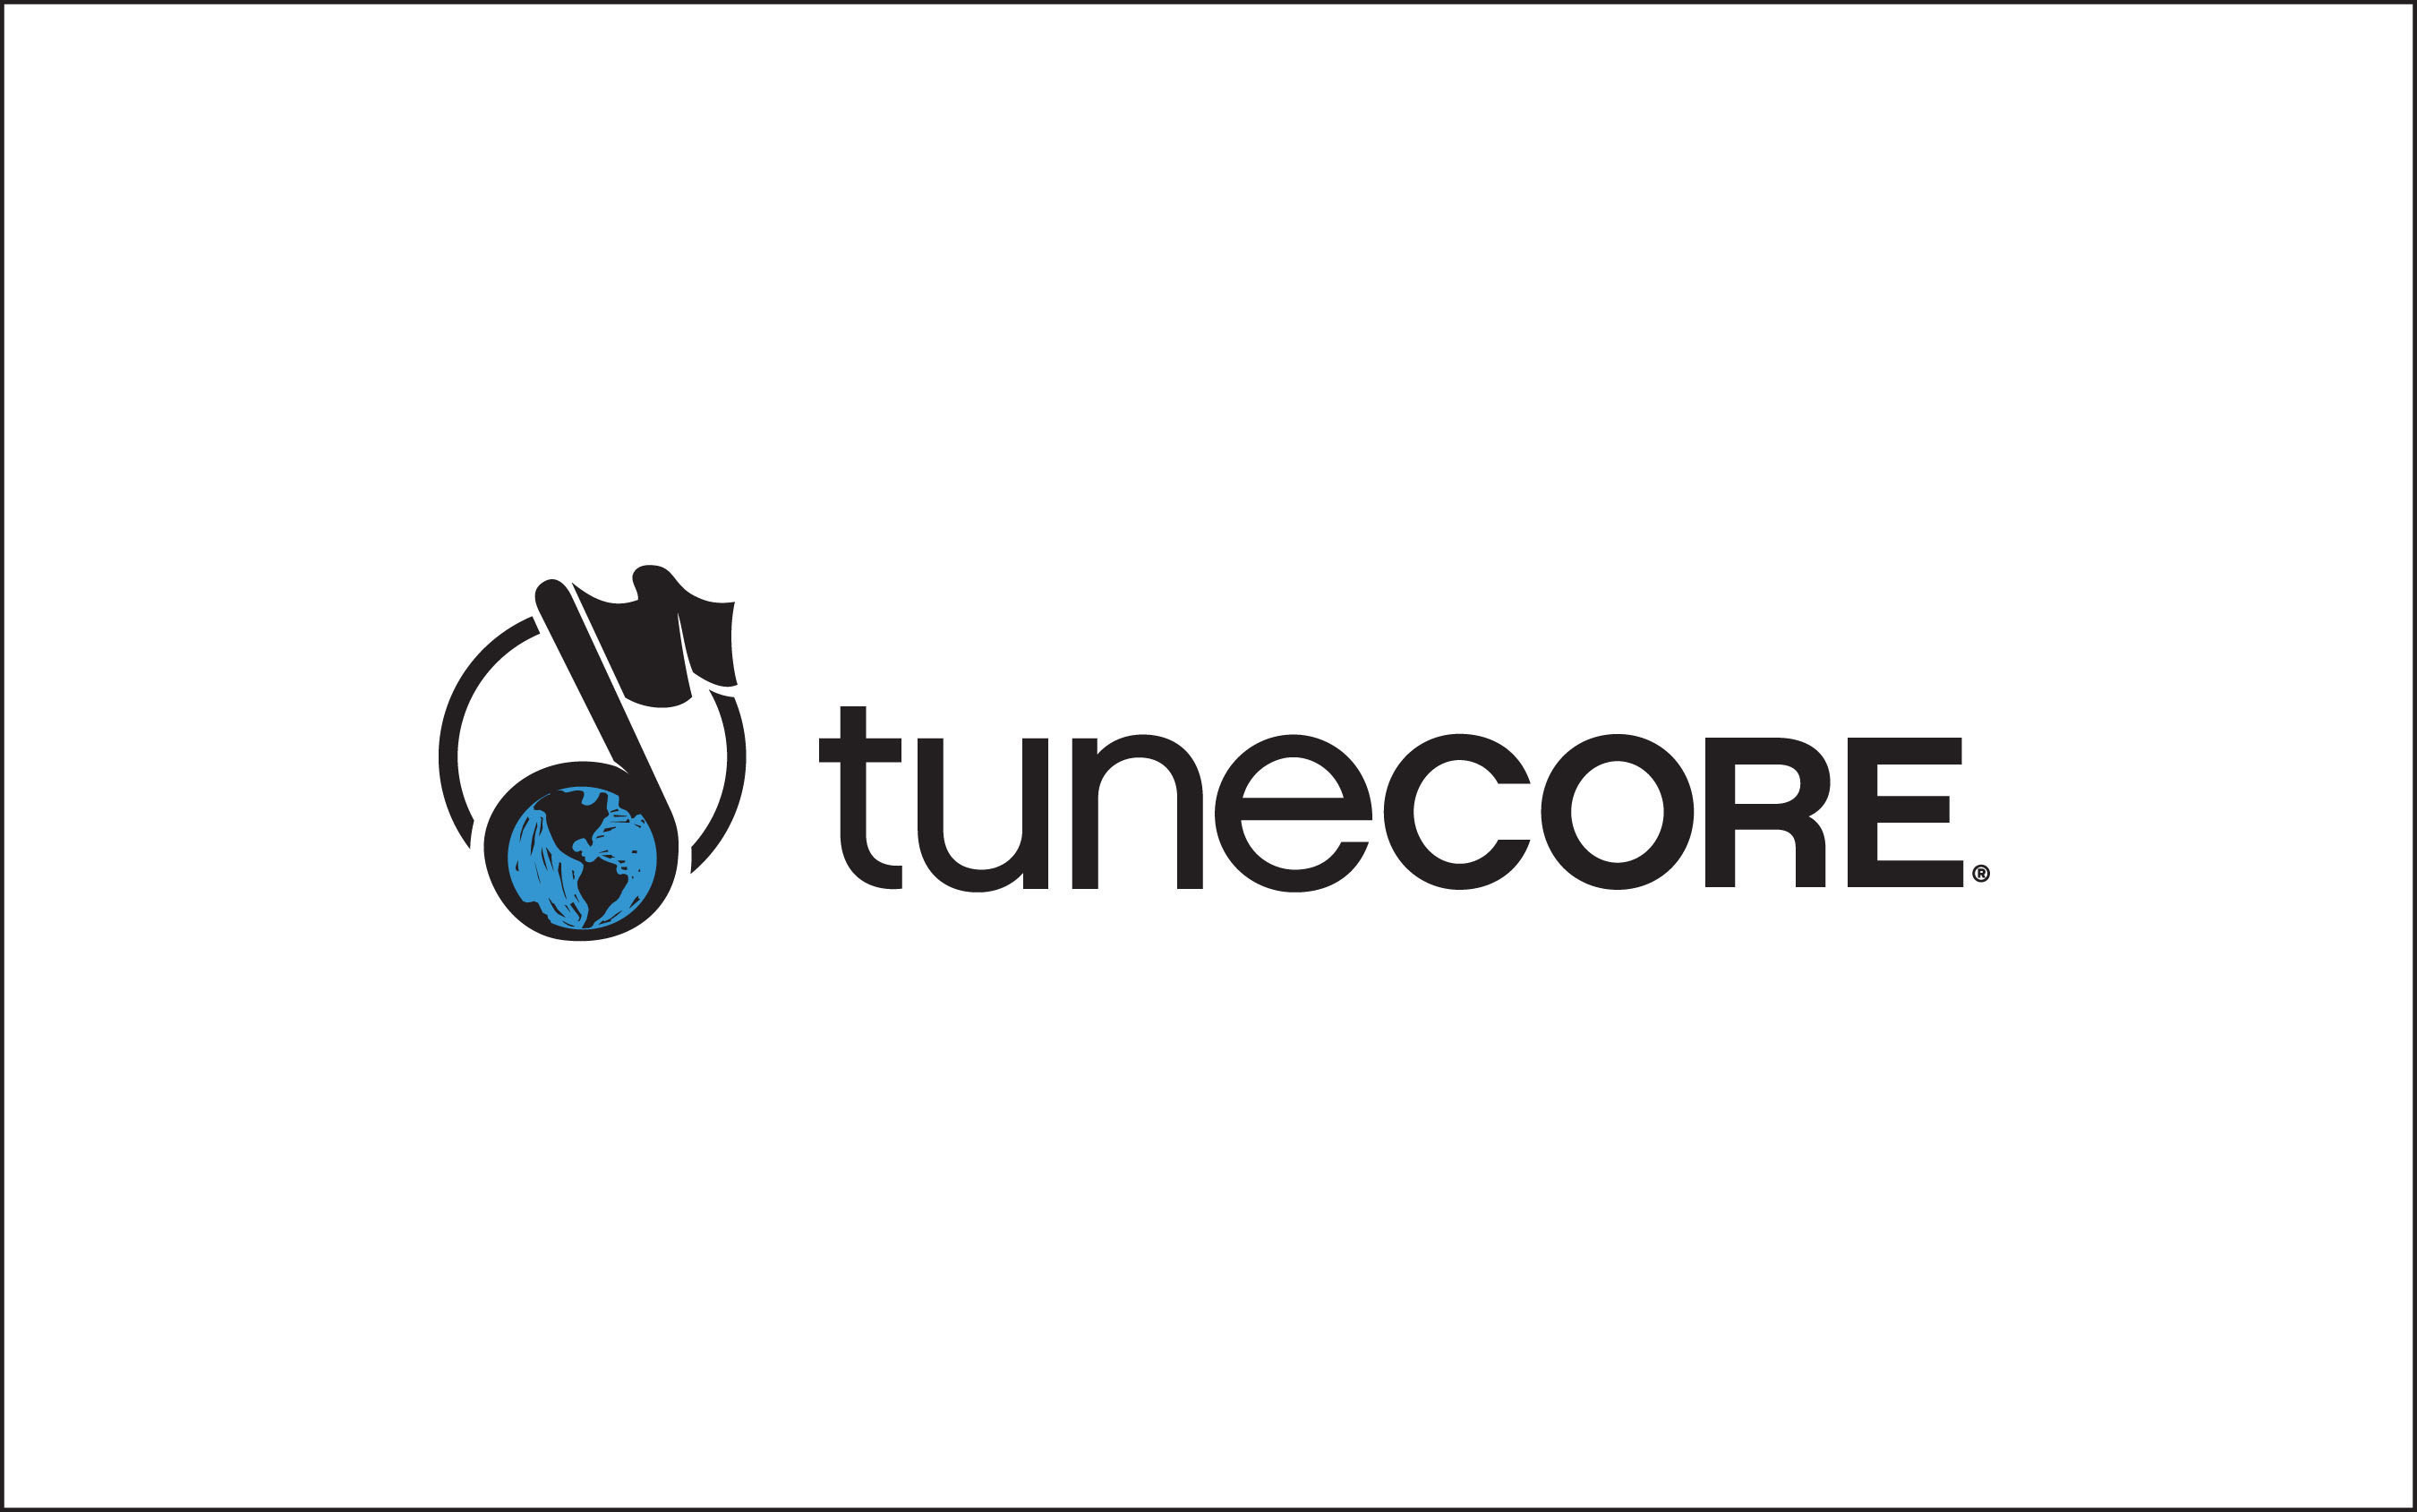 TuneCore brings more music to more people, while helping musicians and songwriters increase money-earning opportunities and take charge of their own careers. The company has one of the highest artist revenue-generating music catalogs in the world, earning TuneCore Artists $438.8 million on 8.8 billion streams and downloads since inception. TuneCore Music Distribution helps artists, labels and managers sell their music through iTunes, Amazon MP3, Spotify and other major download and streaming sites while...